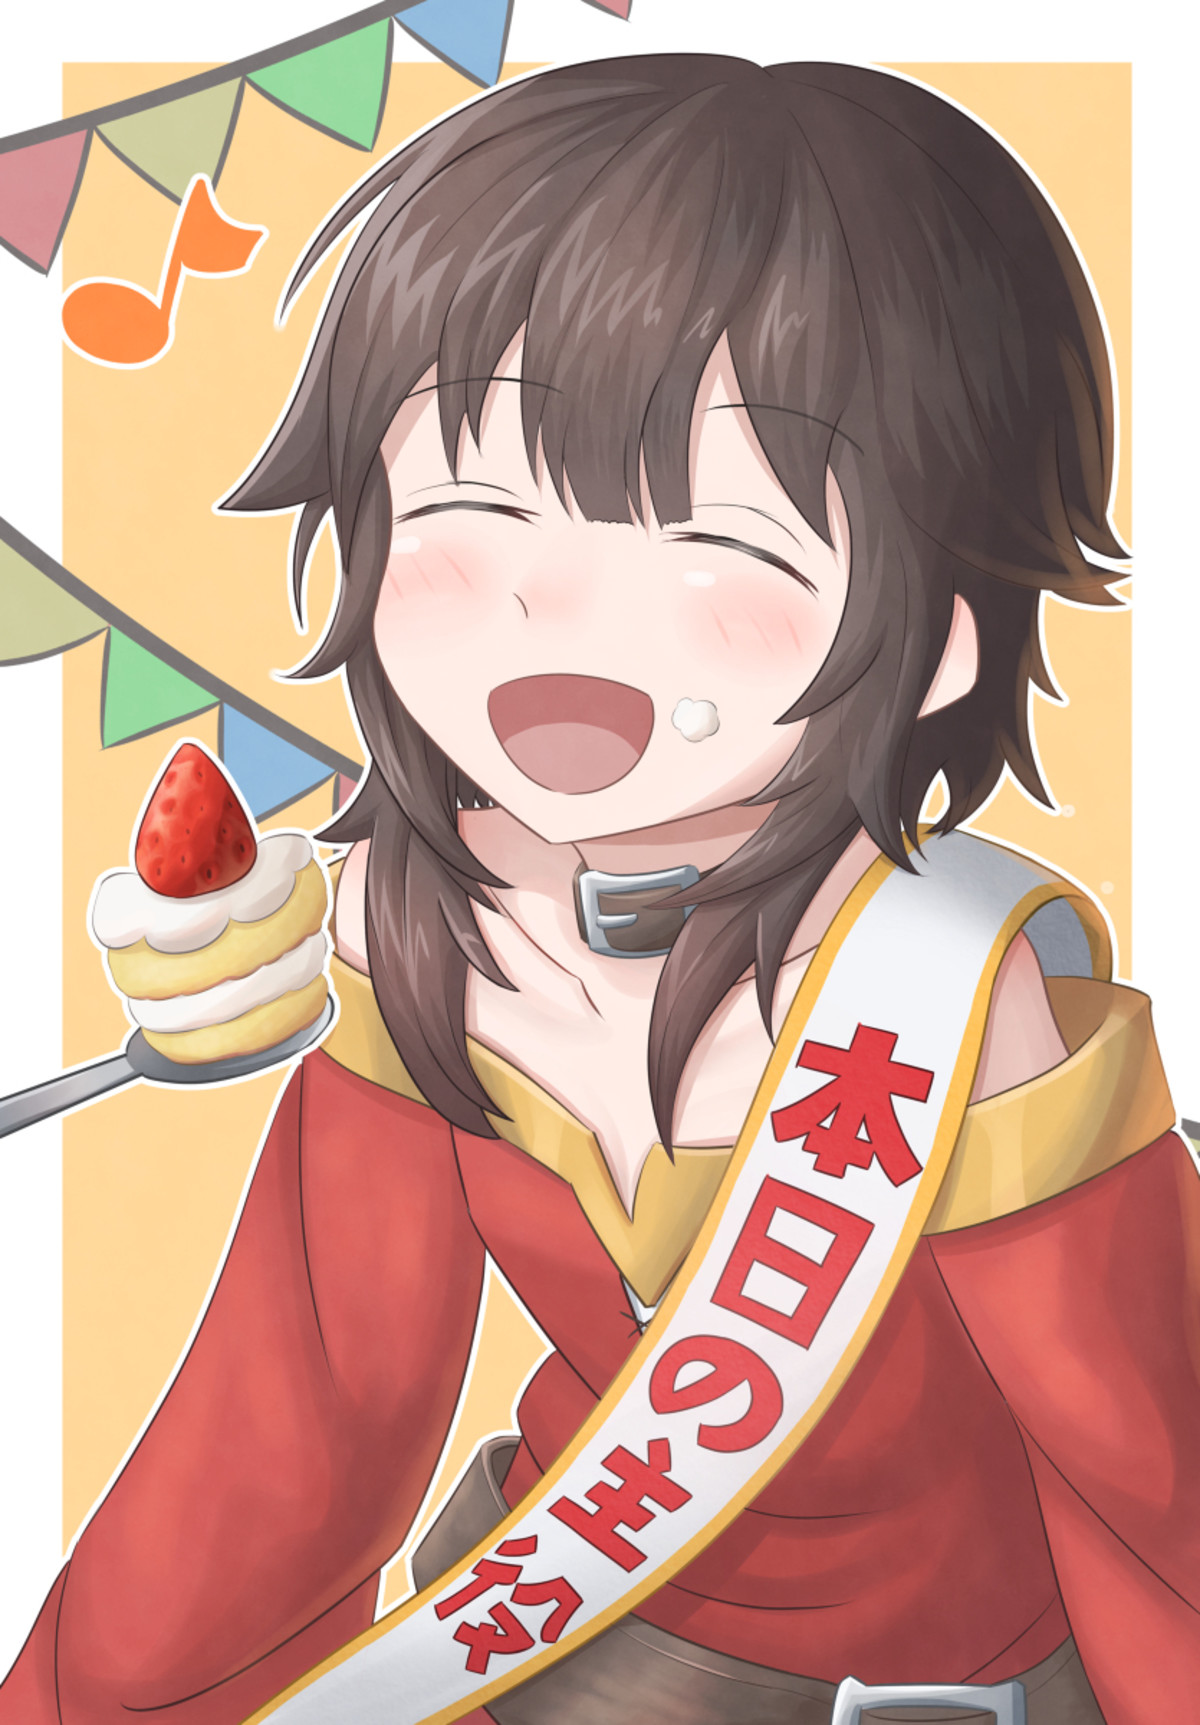 Daily Megu - 1066: Eat Cake. join list: DailySplosion (827 subs)Mention History Source: .. Can any weebs translate the sash?